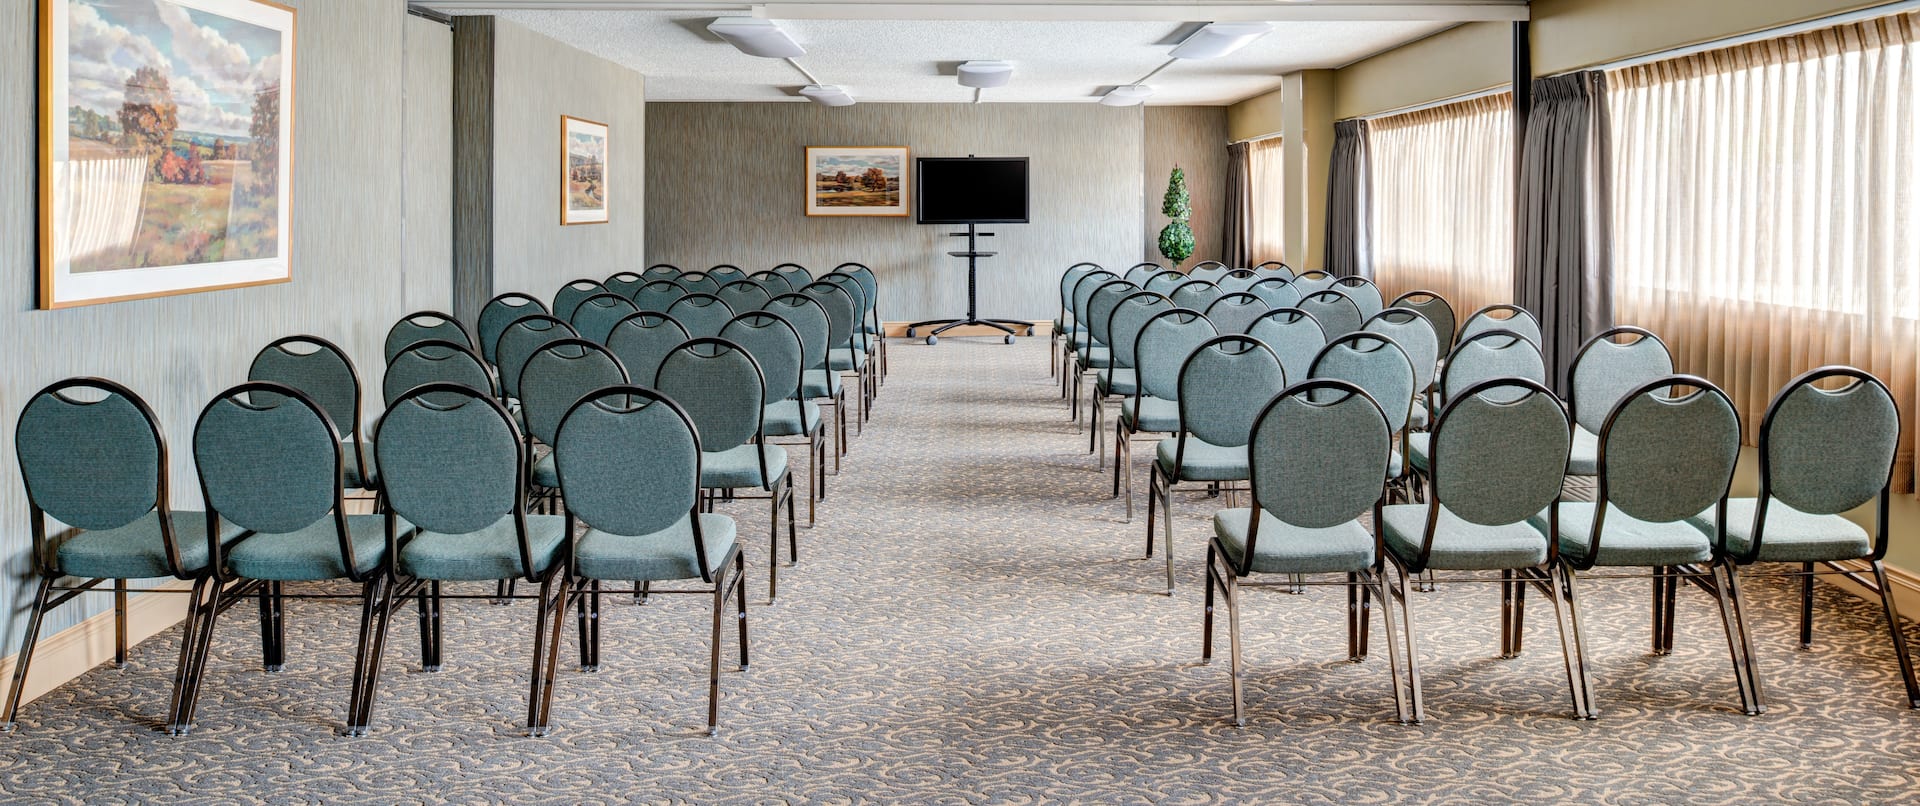 Chairs Set in Rows in Parkside Meeting Room